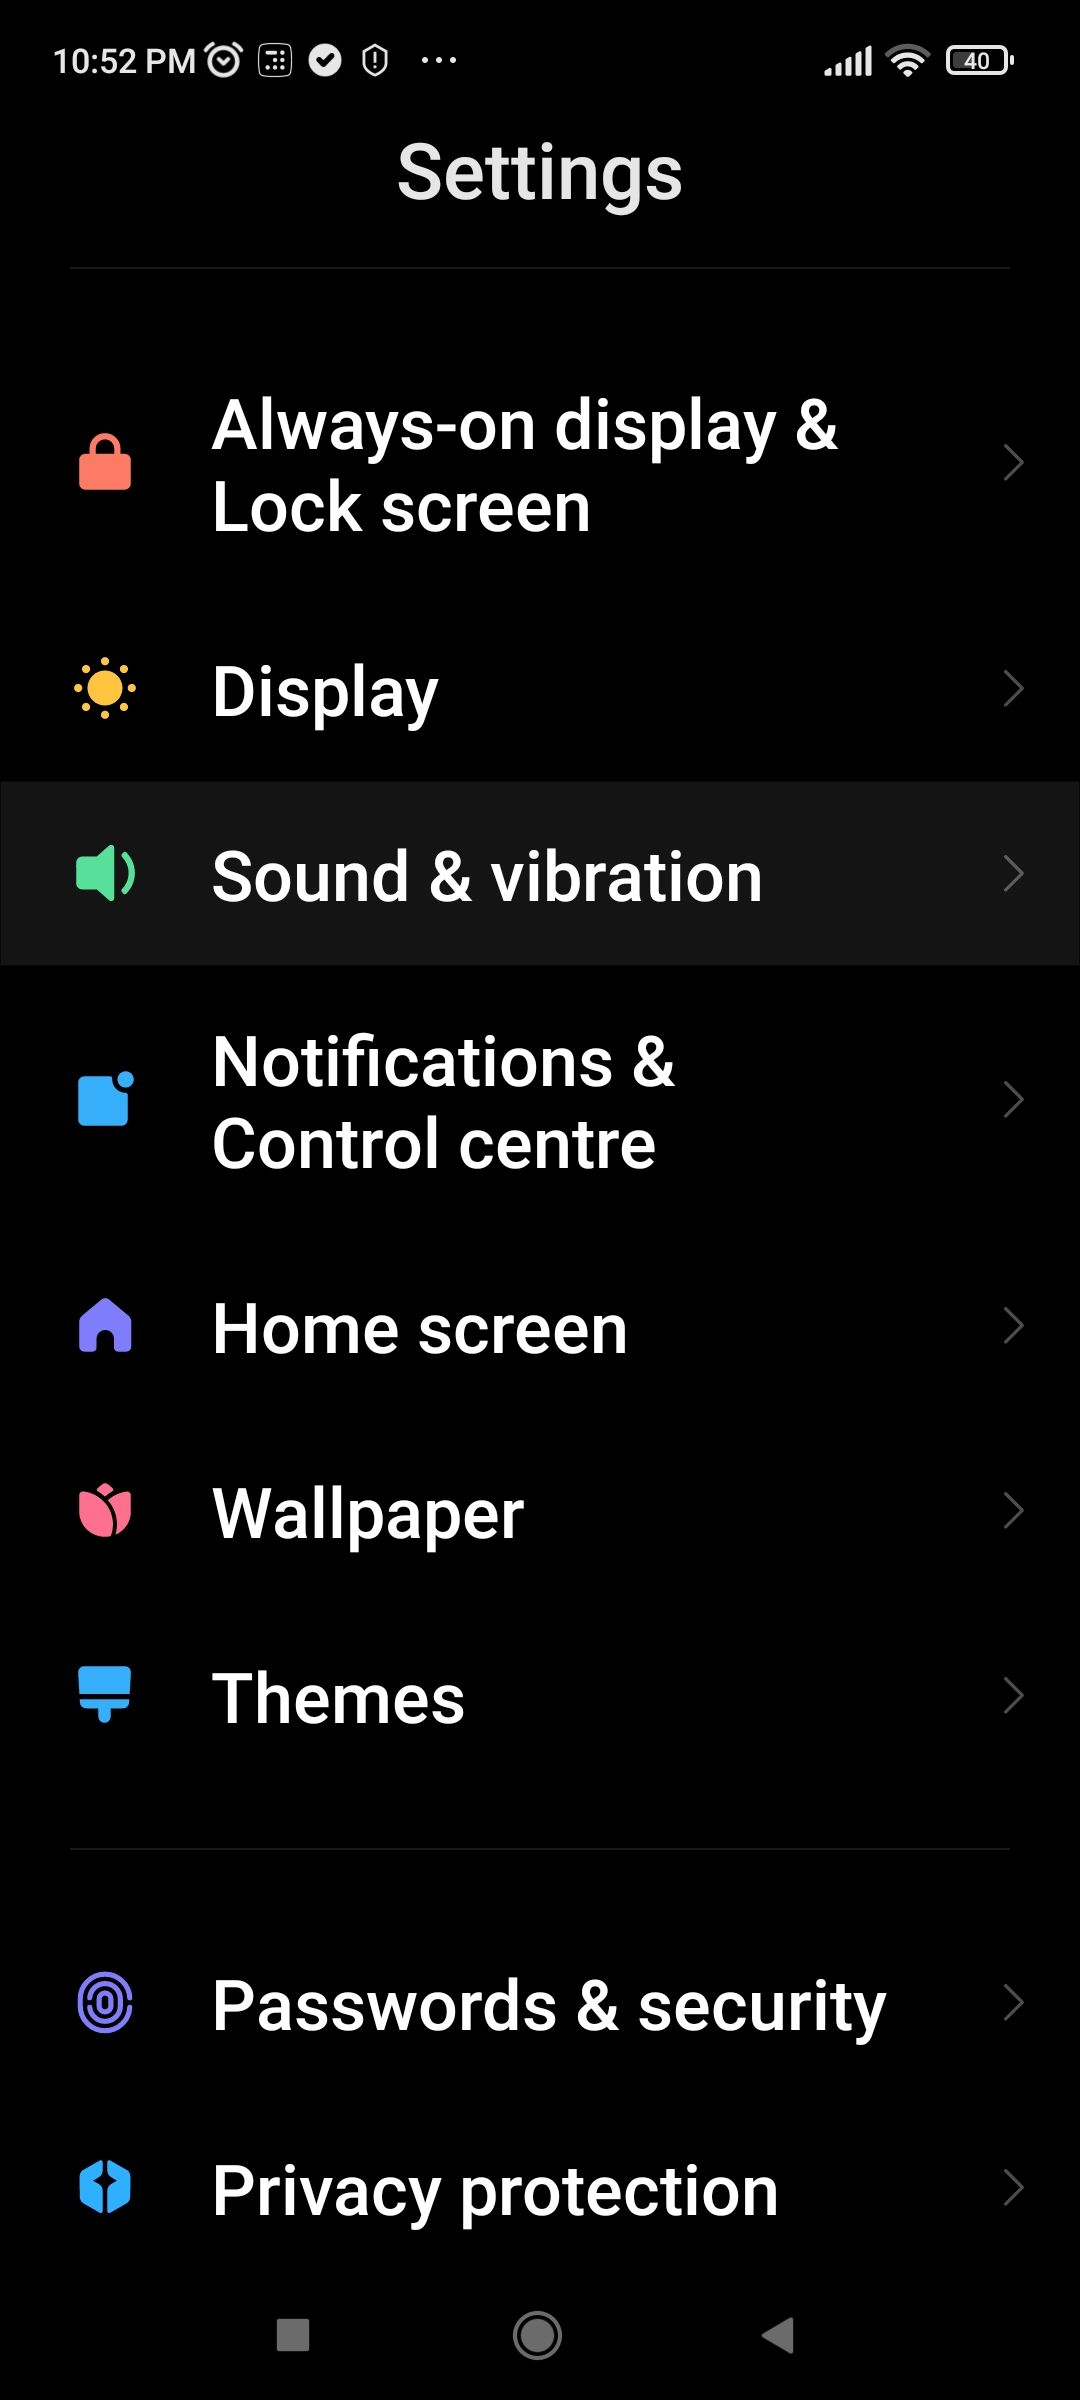 Notifications & Control centre in Xiaomi Settings